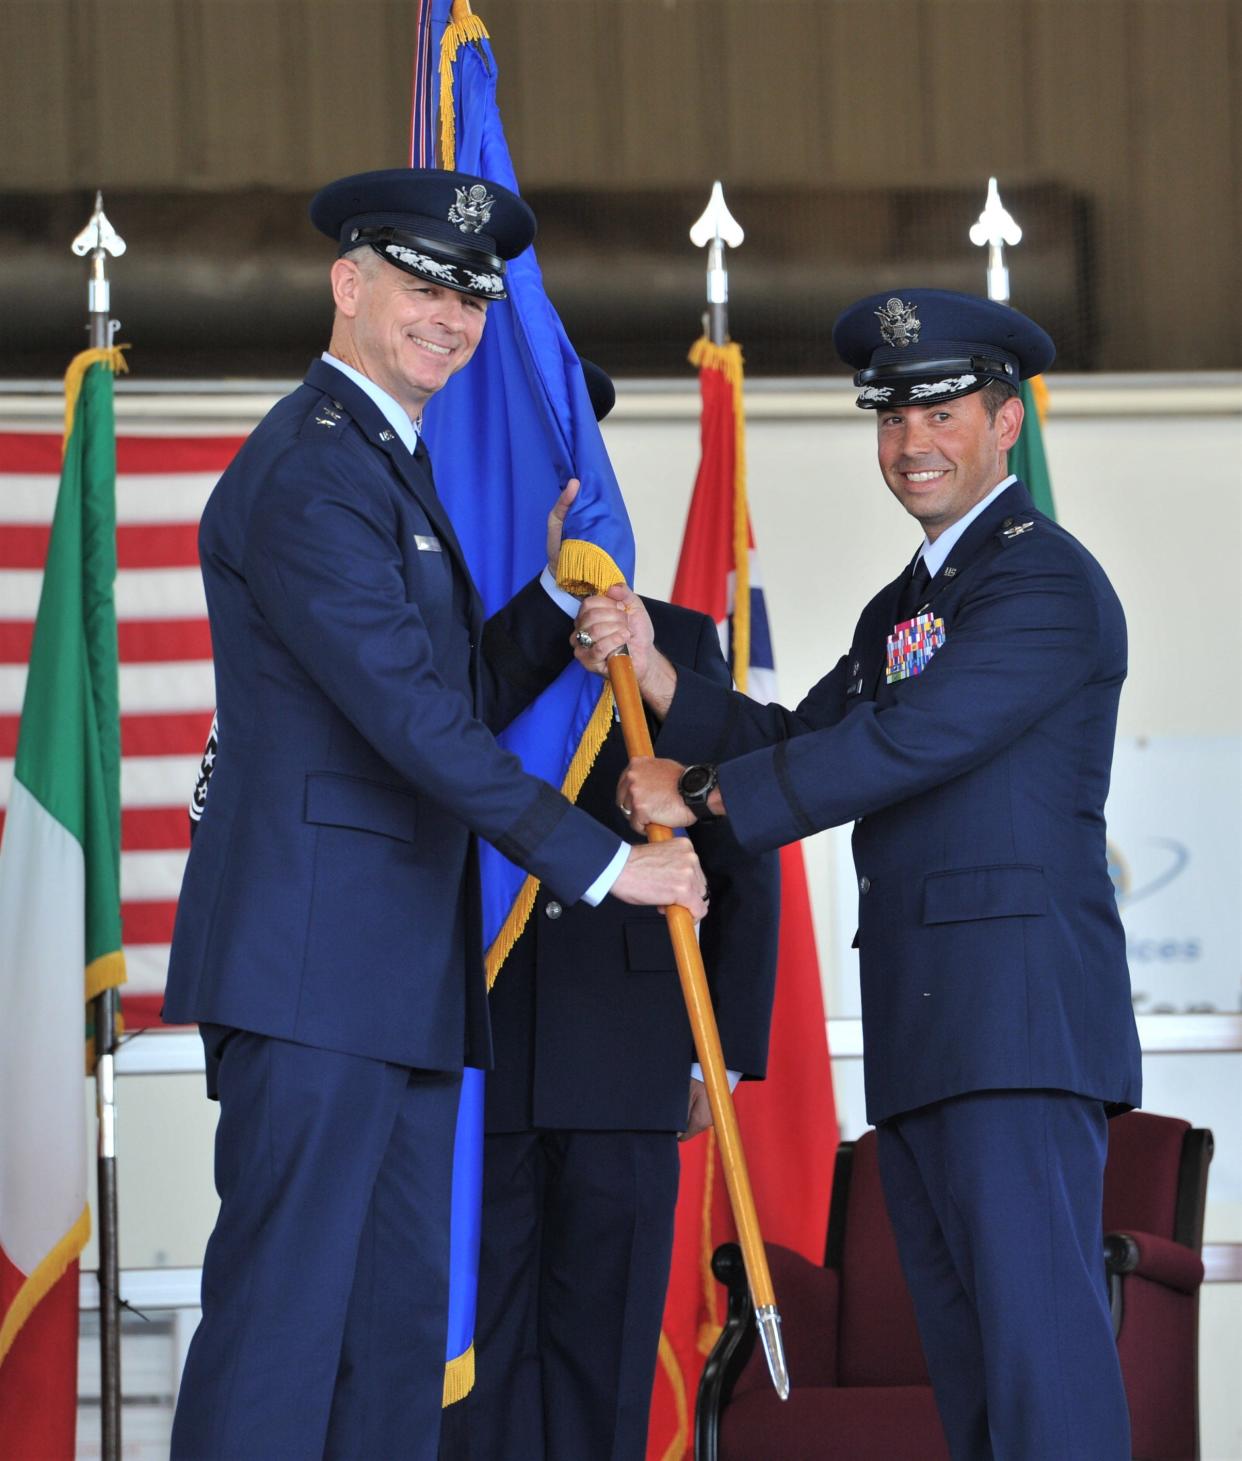 Major General Craig Wills 19th Air Force Commander (left) stands with Colonel Brad Orgeron in handing off the 80th Flying Training Wing flag during the 80th Flying Training Wing Change of Command ceremony at Sheppard Air Force Base in Wichita Falls on Friday, June 24, 2022.